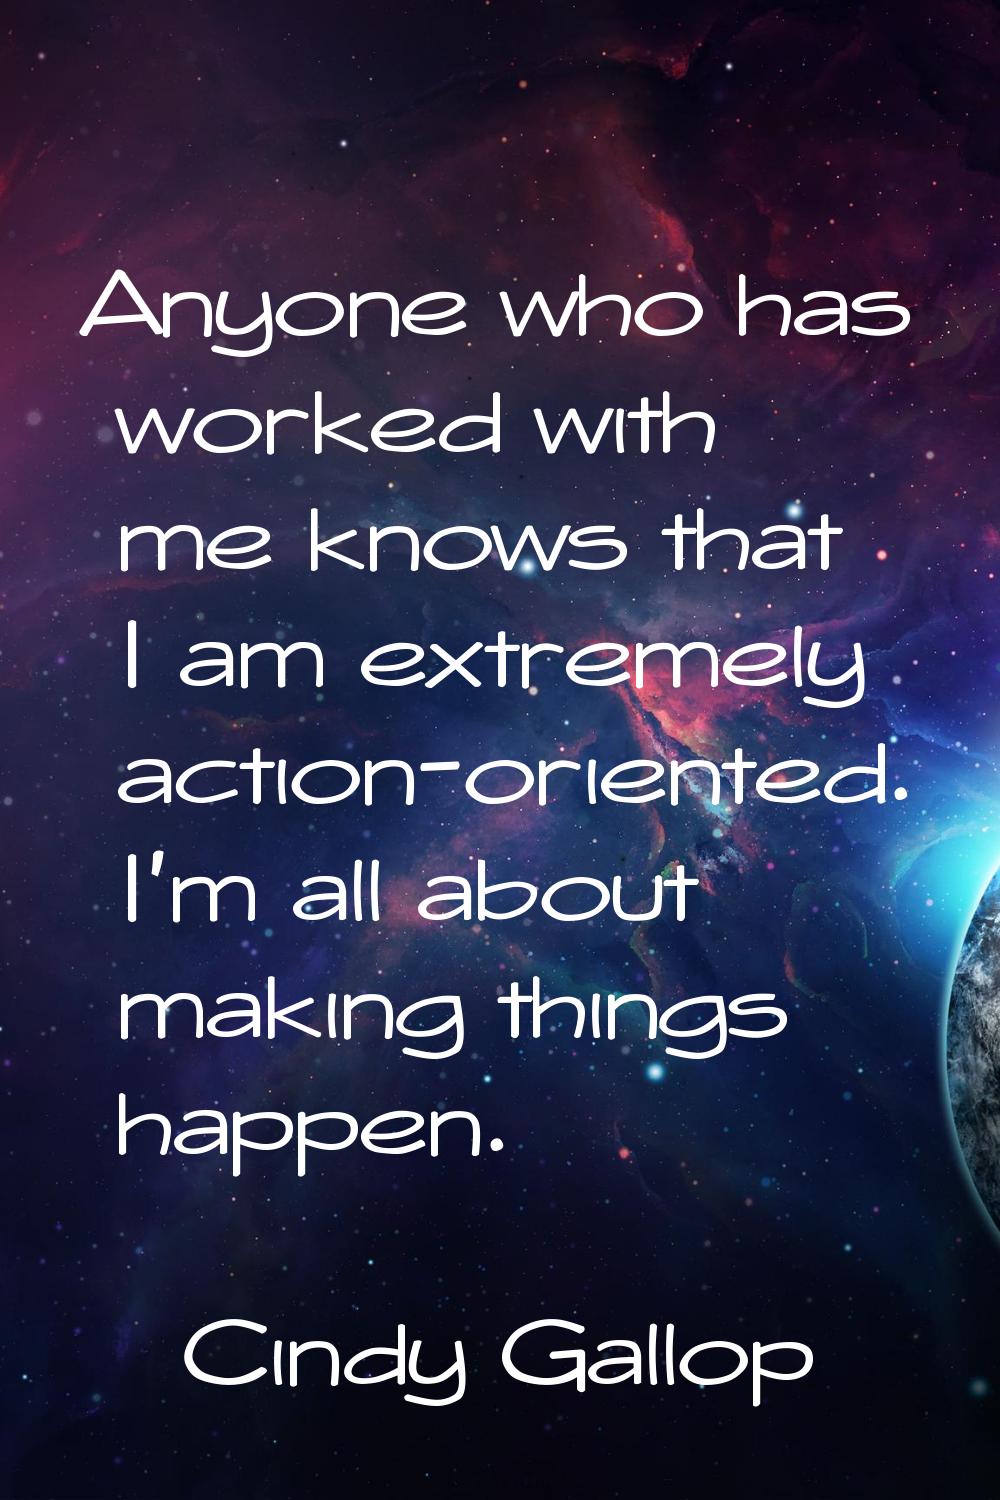 Anyone who has worked with me knows that I am extremely action-oriented. I'm all about making thing